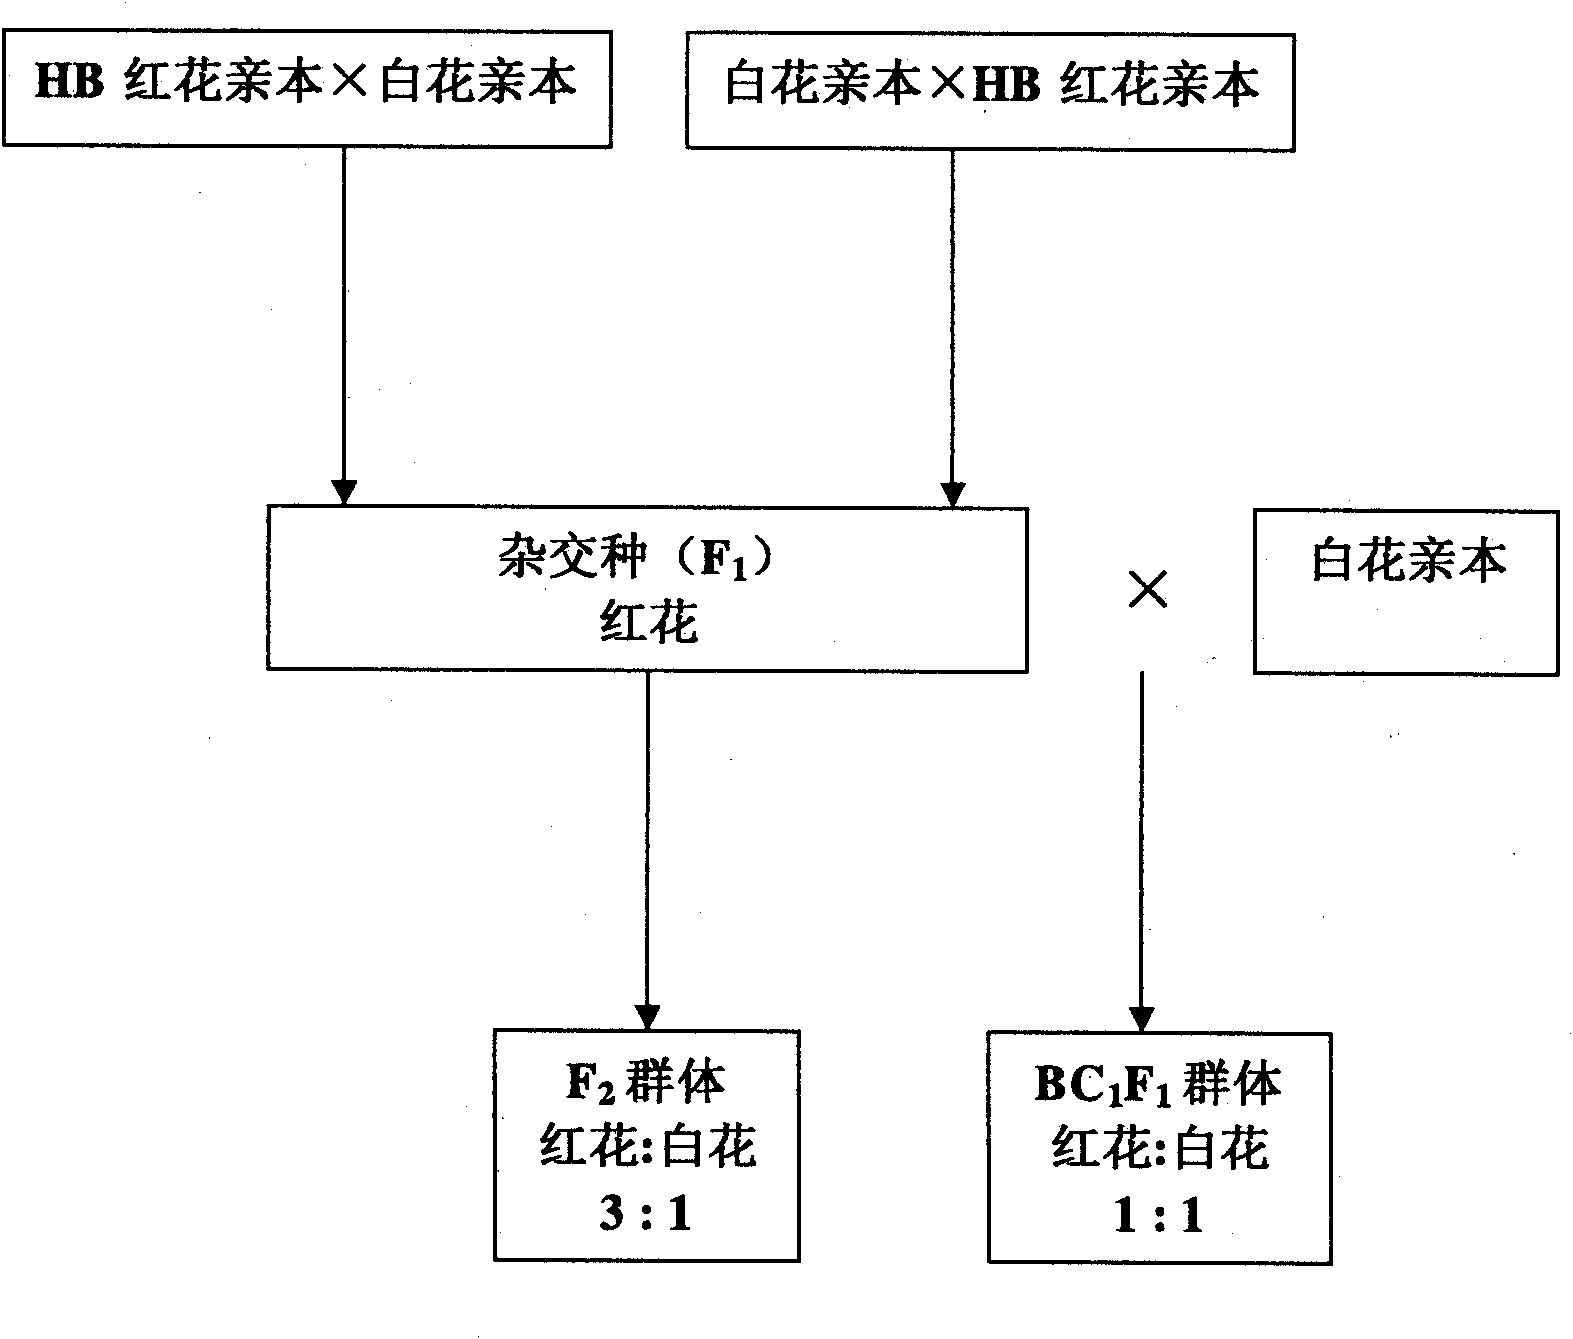 Method for preparing and identifying cotton crossbreed